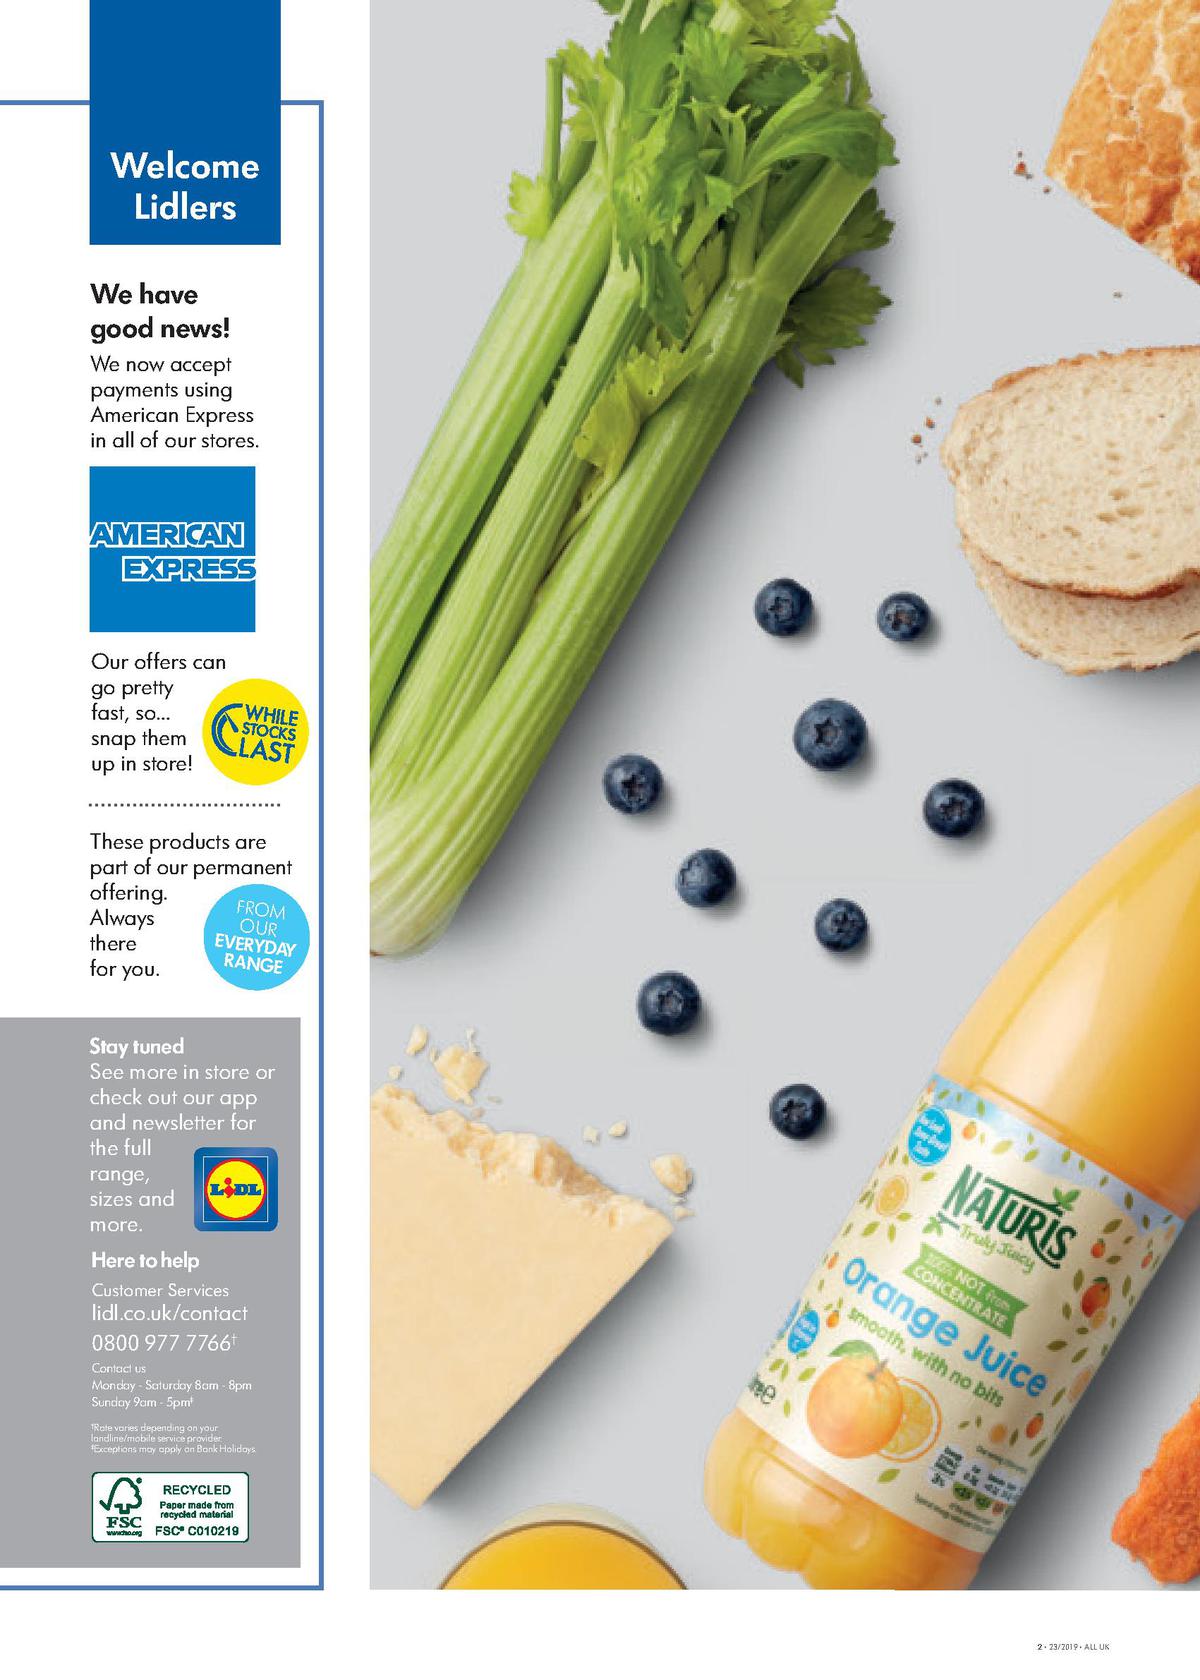 LIDL Offers from 6 June